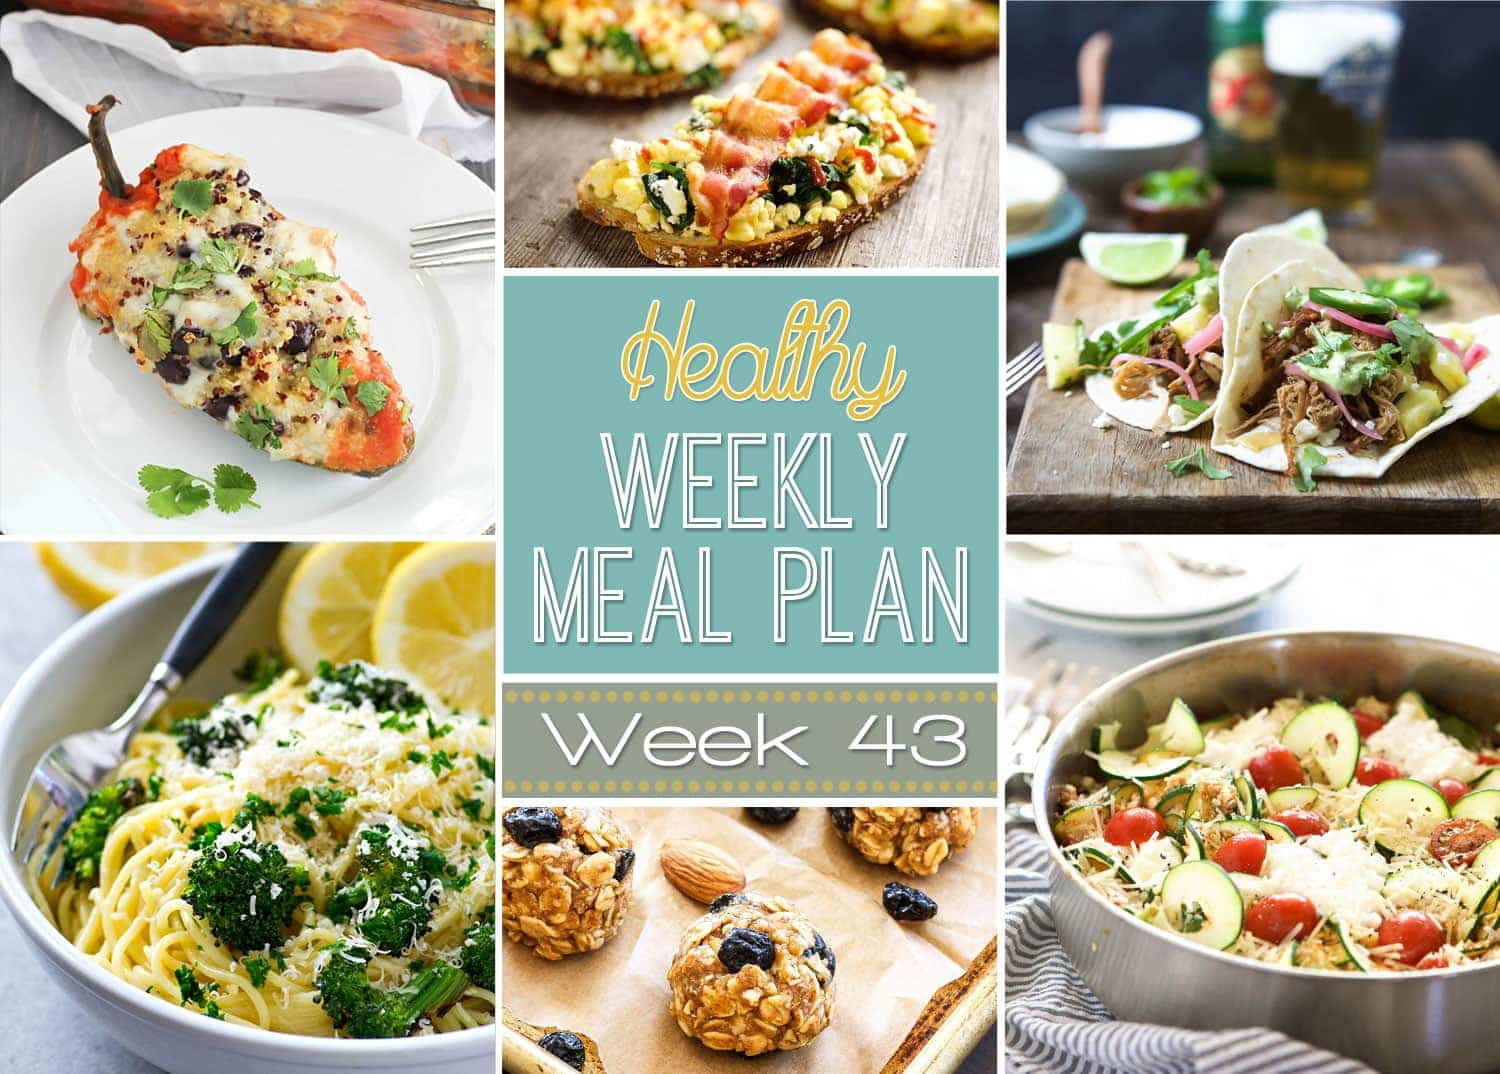 Healthy Recipes For Breakfast Lunch And Dinner
 Healthy Meal Plan Week 43